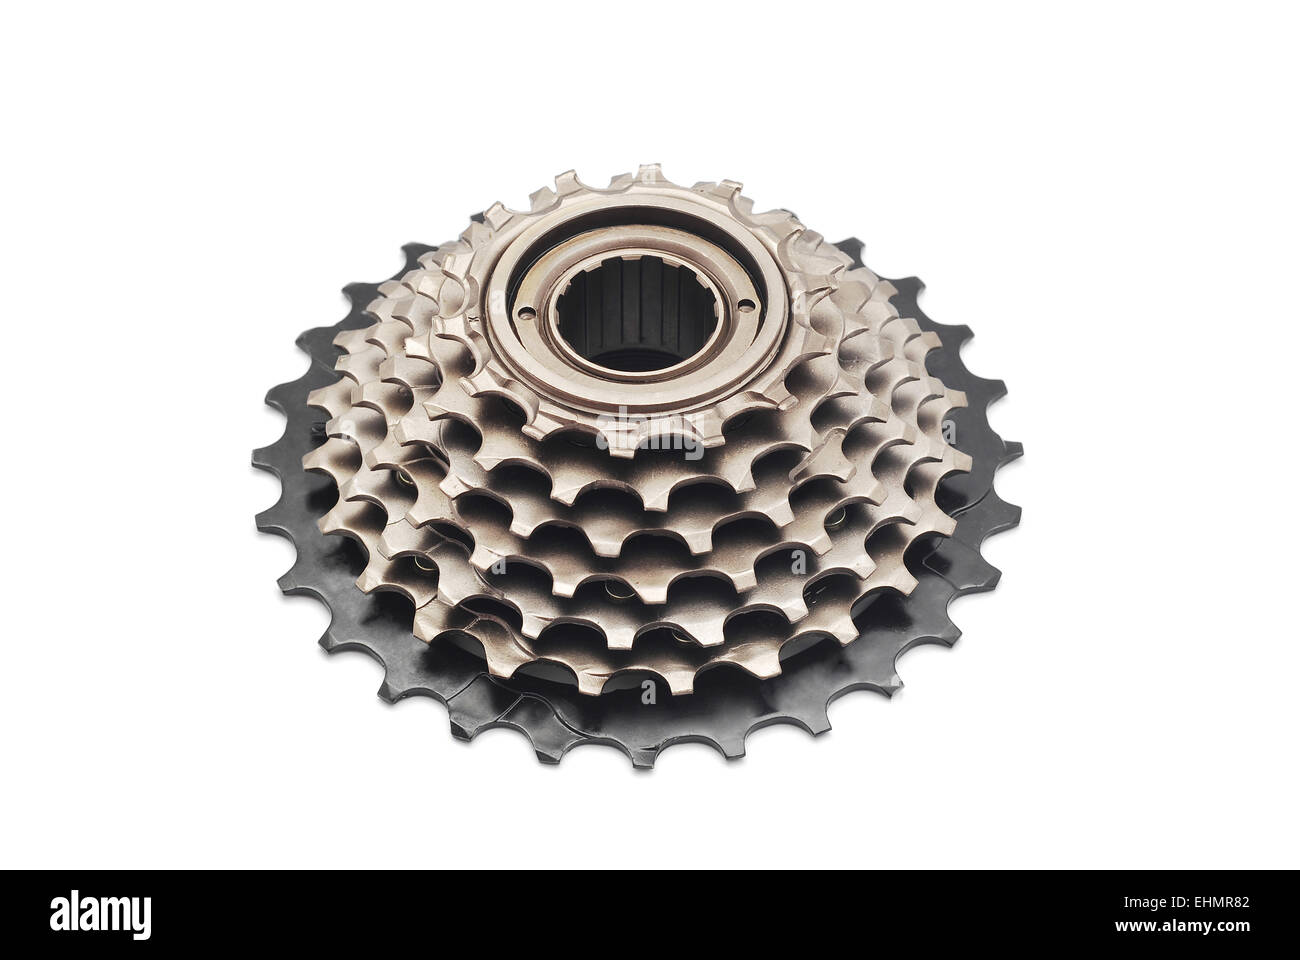 Bicycle gear engrenage on white Banque D'Images